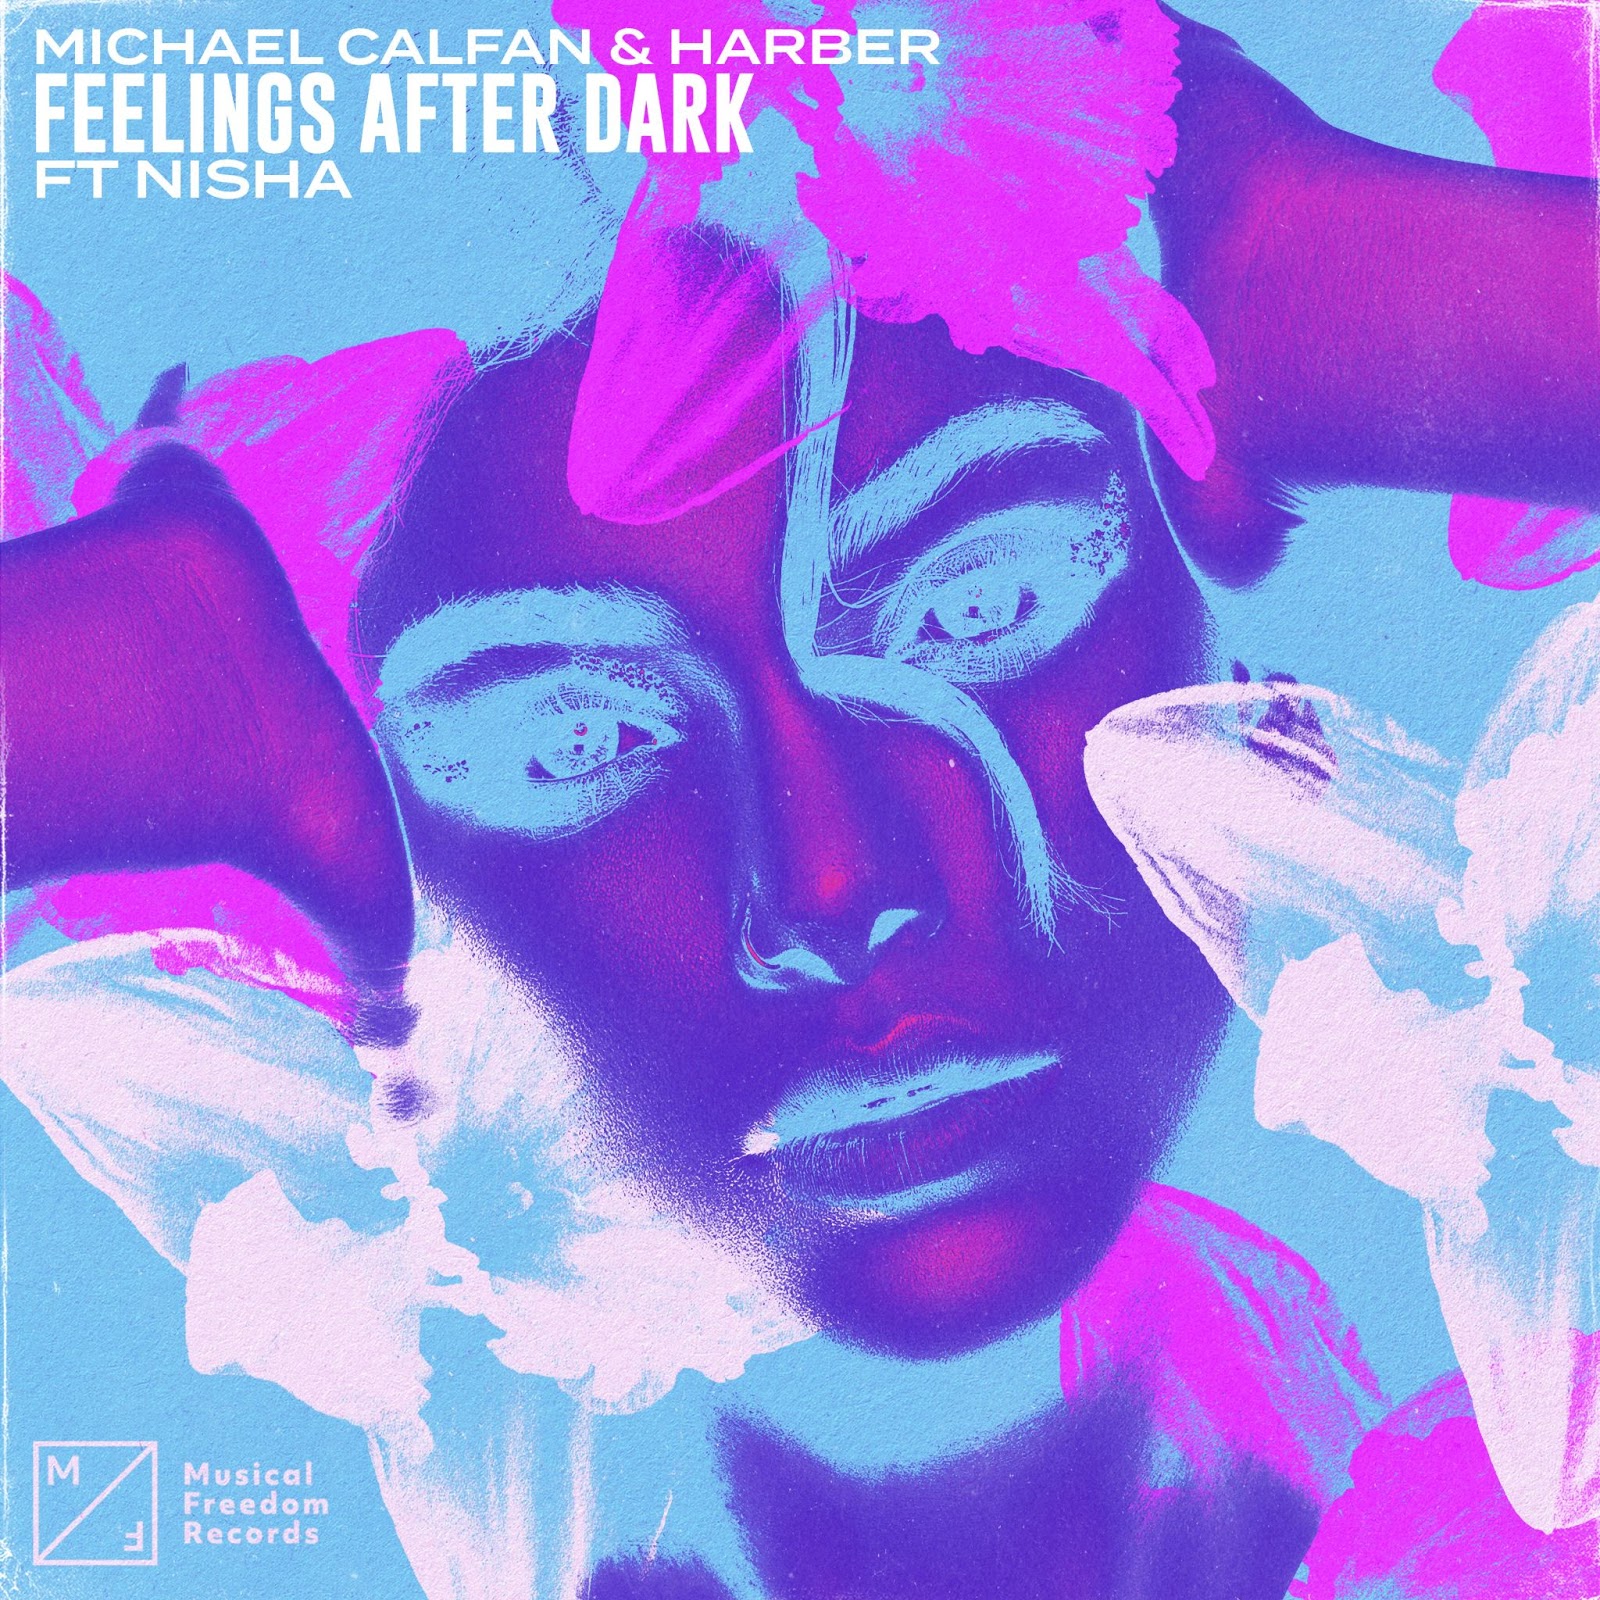 Michael Calfan & HARBER Come Together On ‘Feelings After Dark’ feat. NISHA